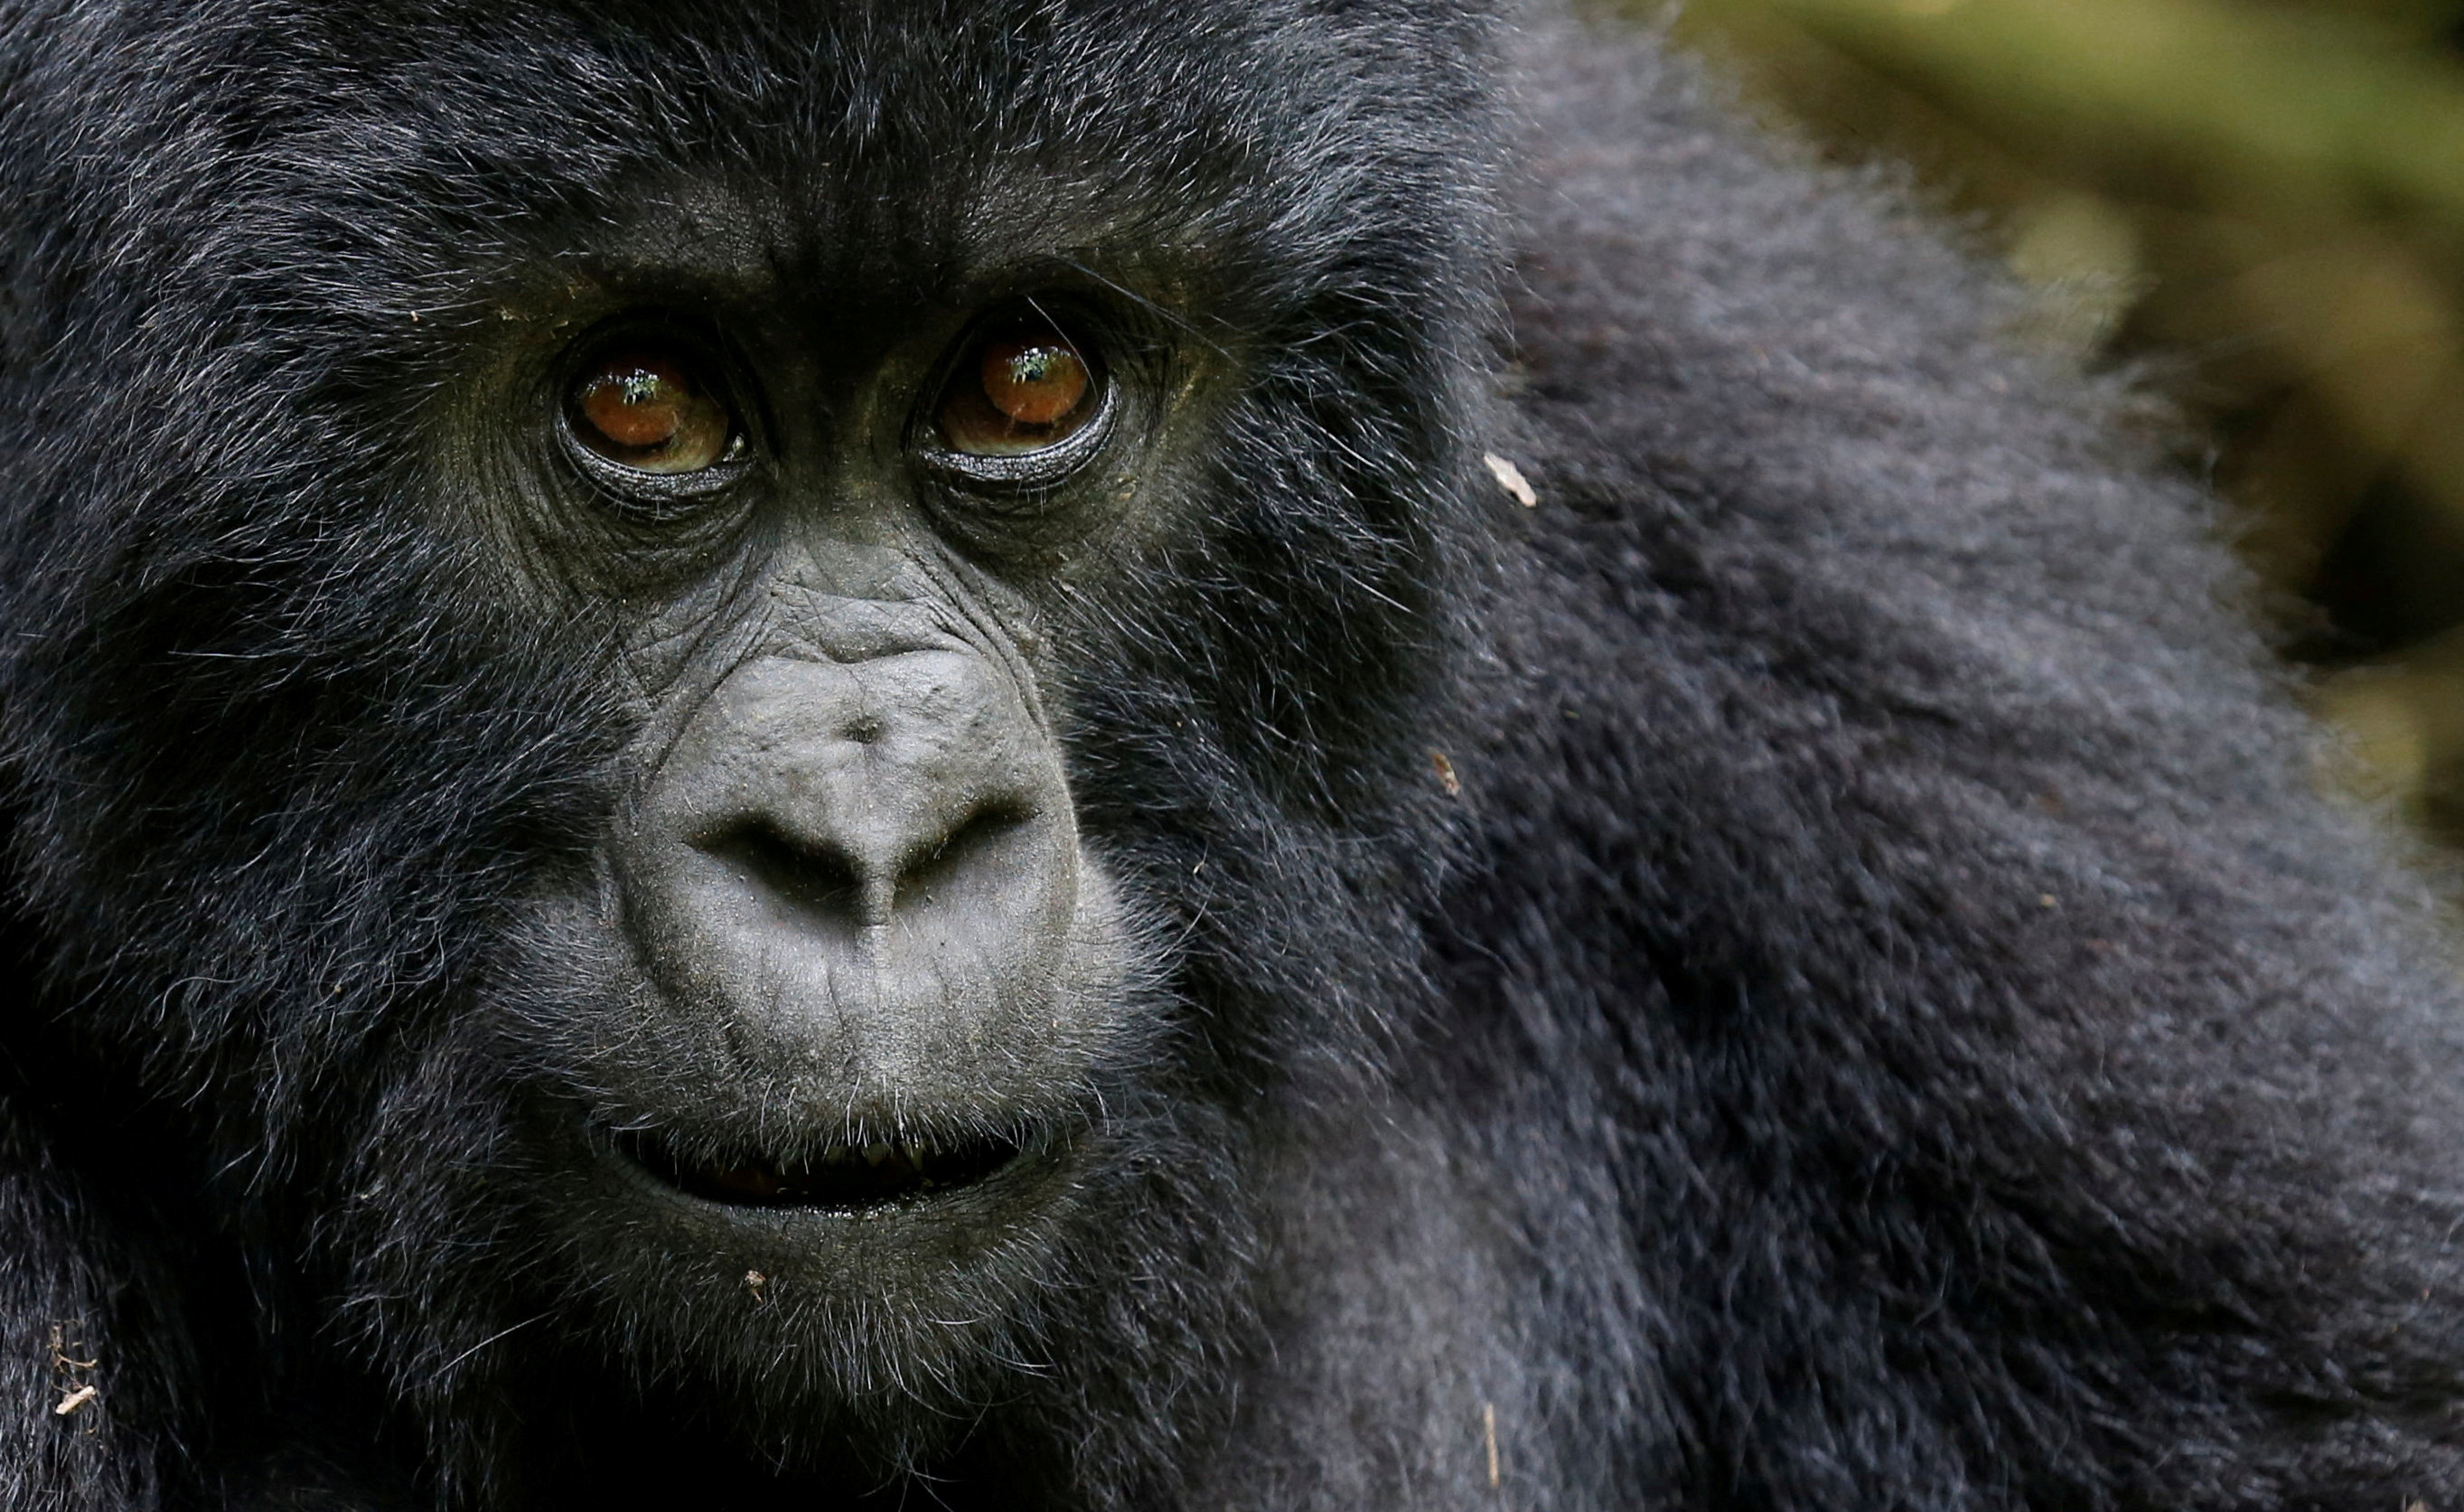 An endangered high mountain gorilla from the Sabyinyo family is seen inside the forest within the Volcanoes National Park near Kinigi